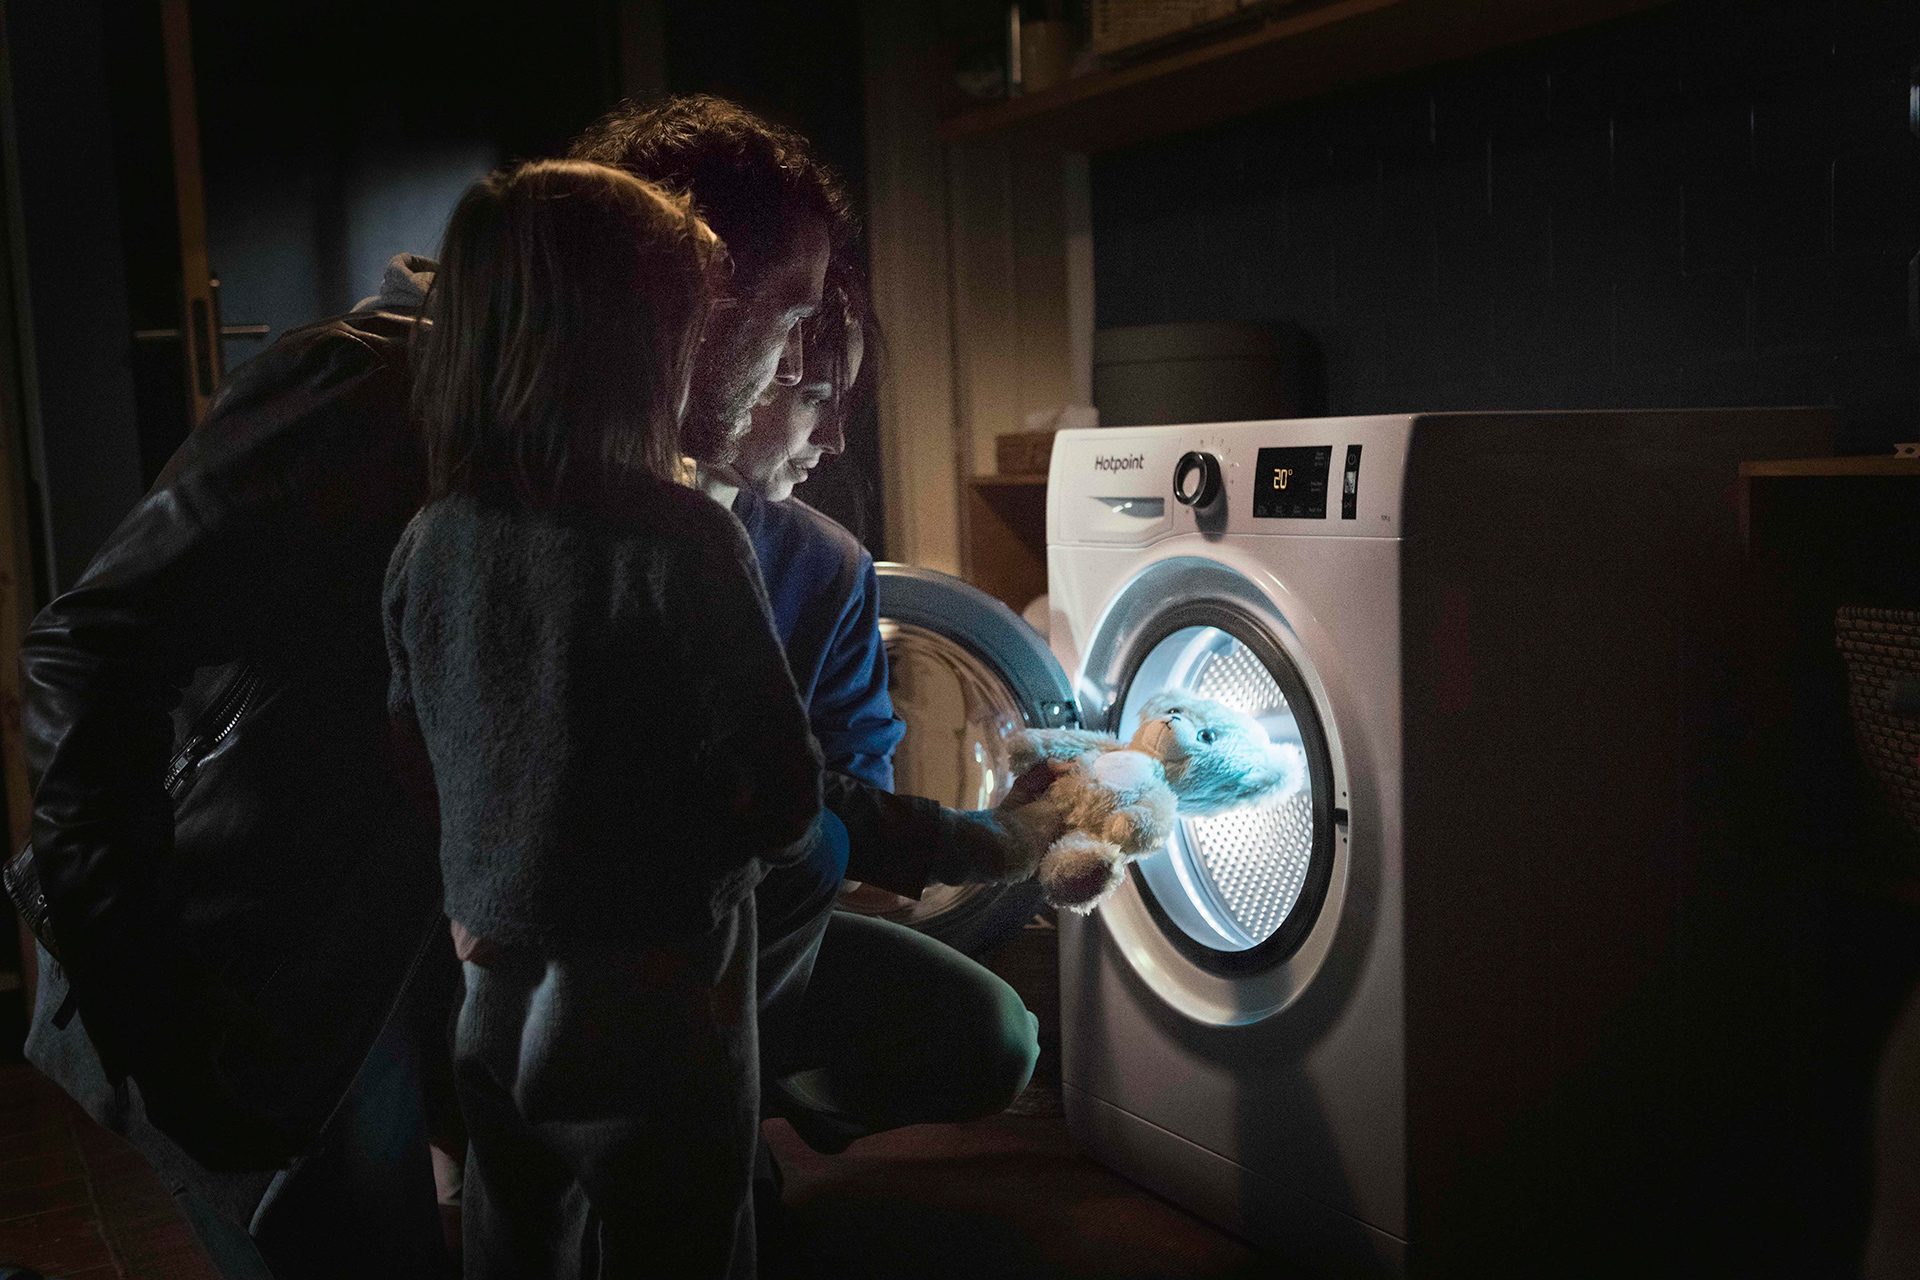 Hotpoint’s Active Washing Machine 2019 Campaign launched in the UK